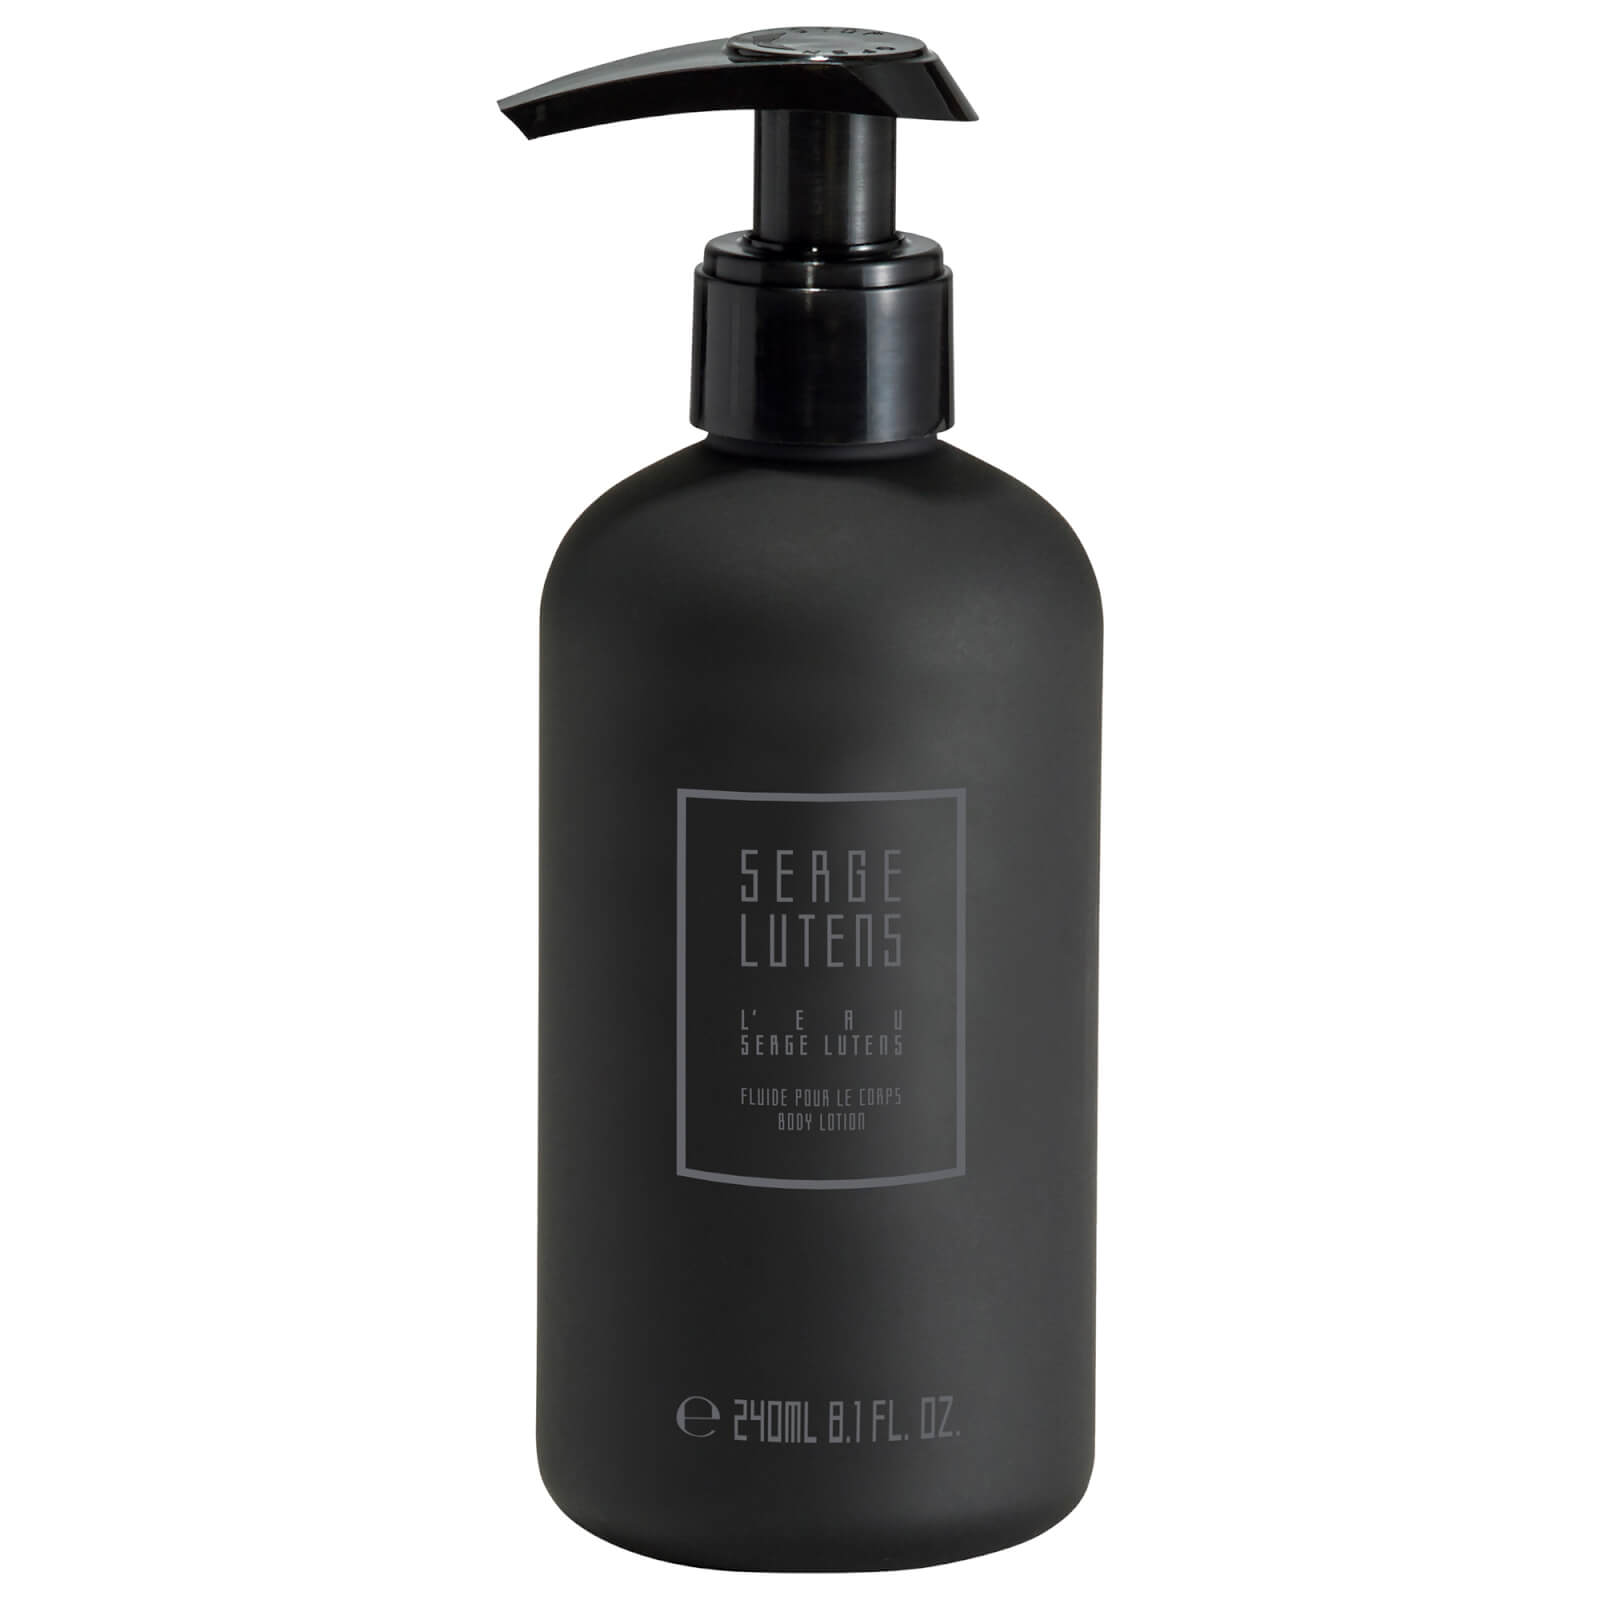 Image of Serge Lutens Matin Lutens L'Eeau Serge Lutens Hand and Body Lotion 240ml